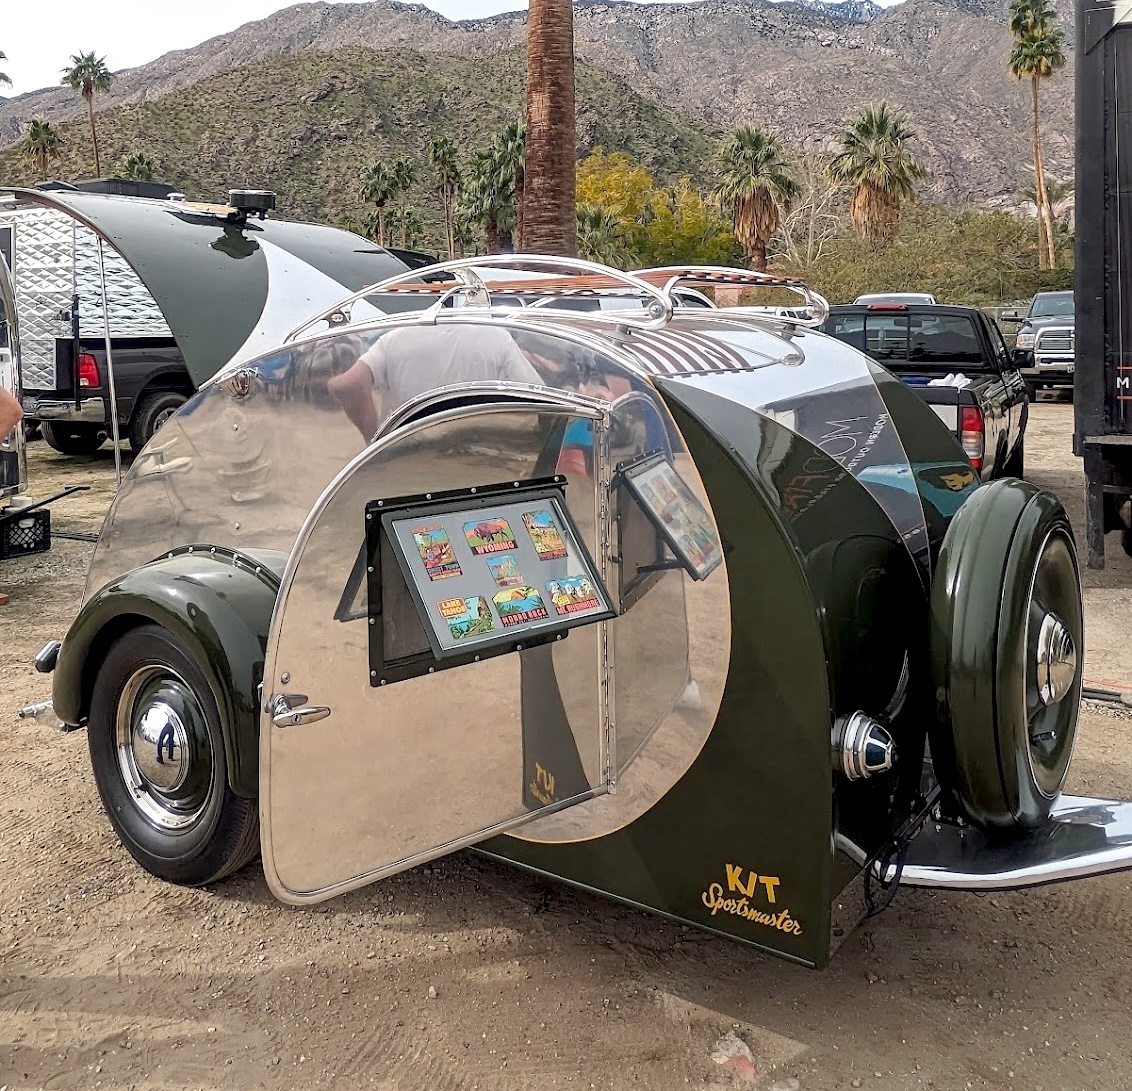 The 2024 Modernism Week Vintage Trailer Show was full of incredible sights, like this Kit Sportsmaster teardrop trailer. 💧 Did you know that the Kit company was founded in 1945 in Long Beach, California? Loved to see so many beautifully restored vehicles on display this year!